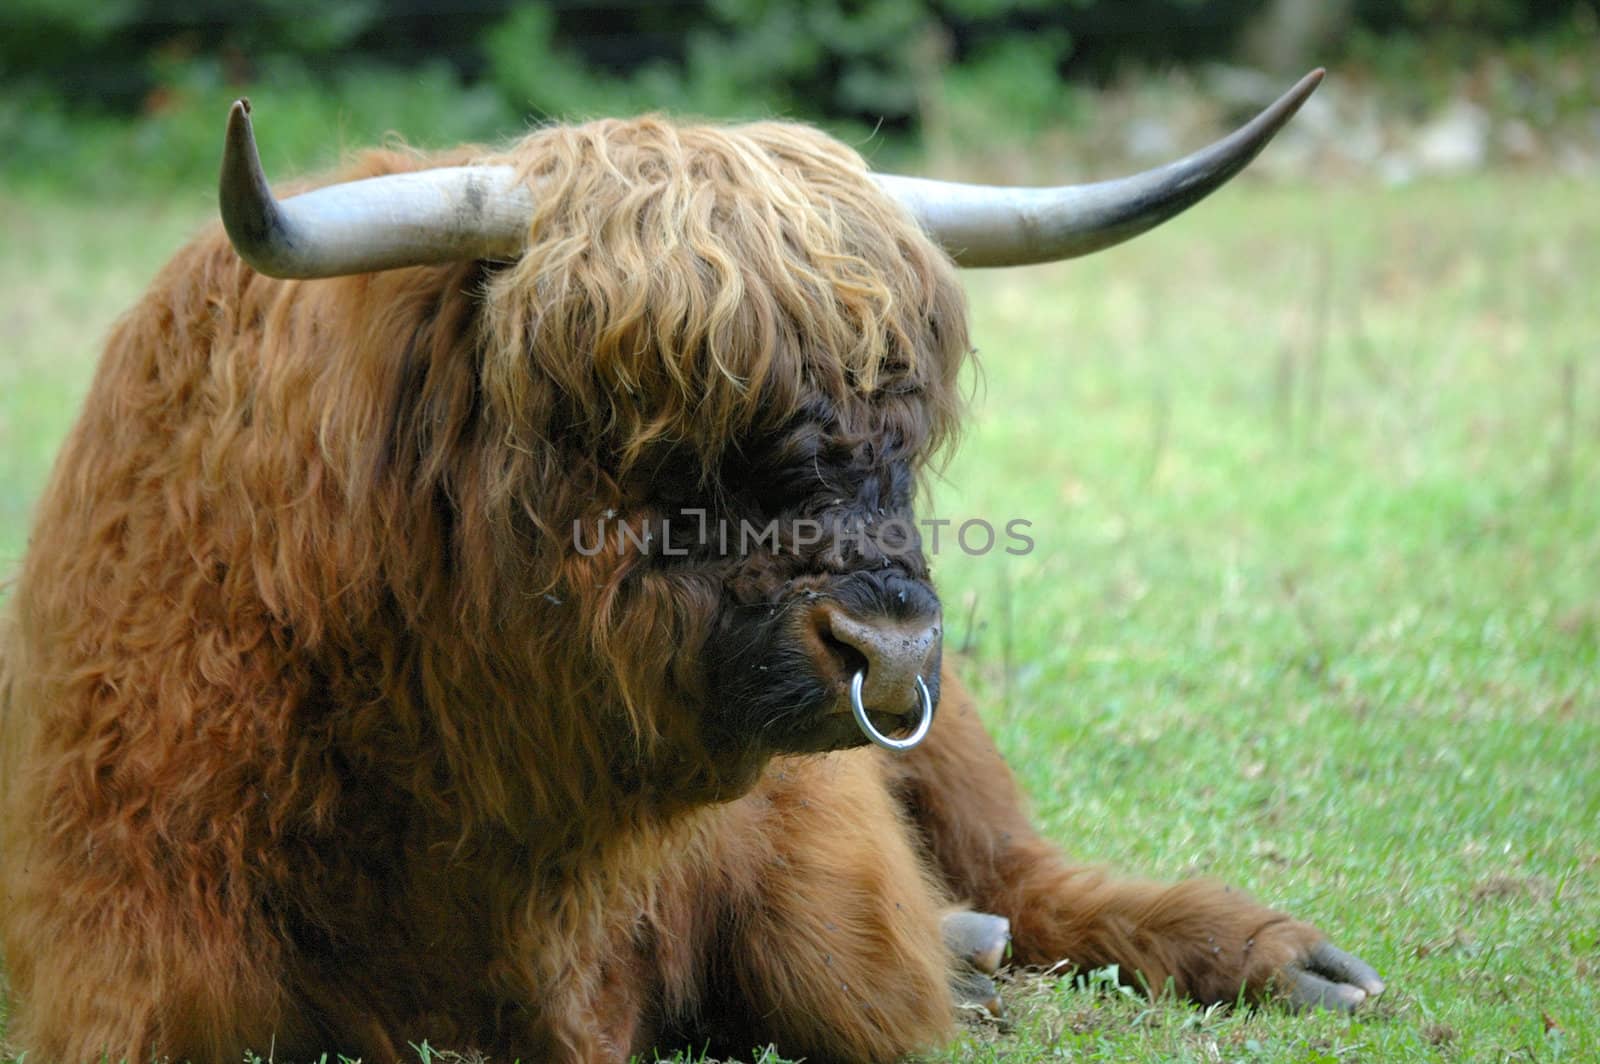 Hairy Coo by Bateleur